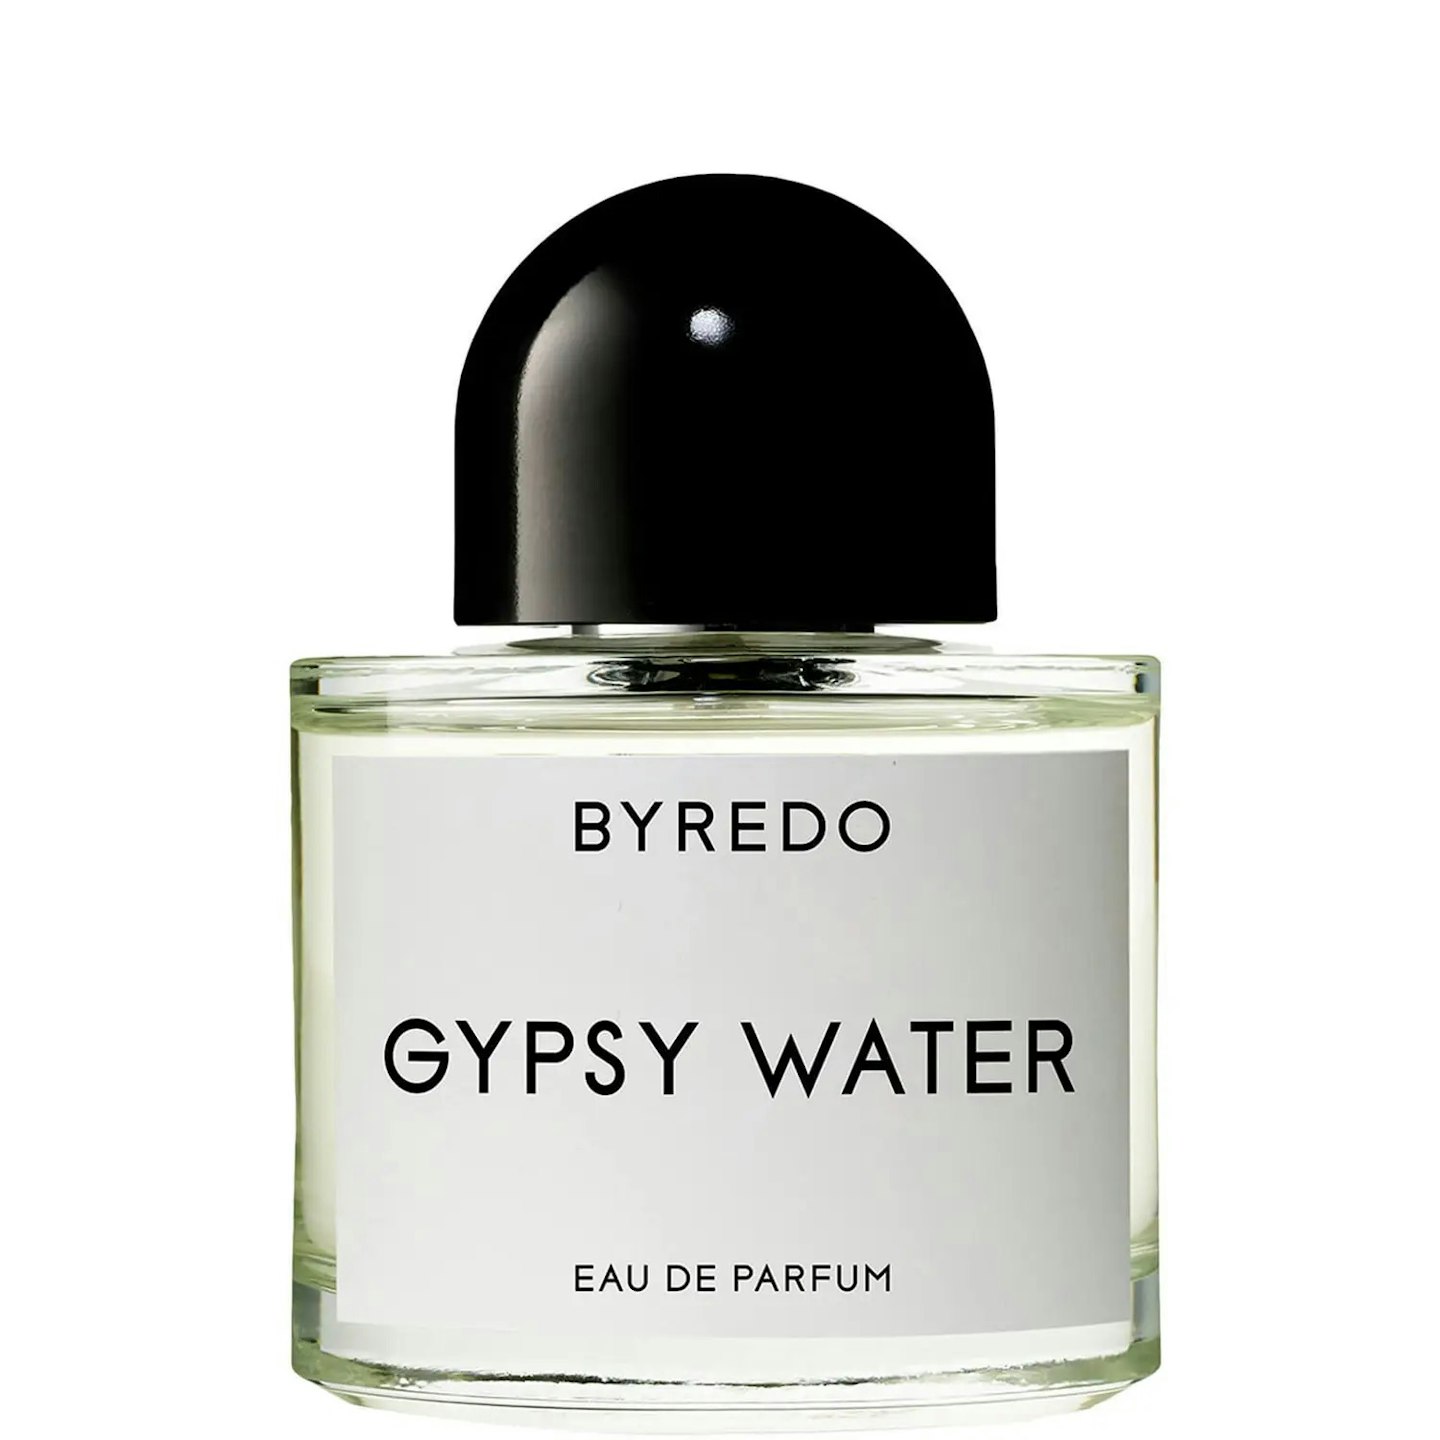 Replying to @linfinthern #greenscreen #dupe for #byredo